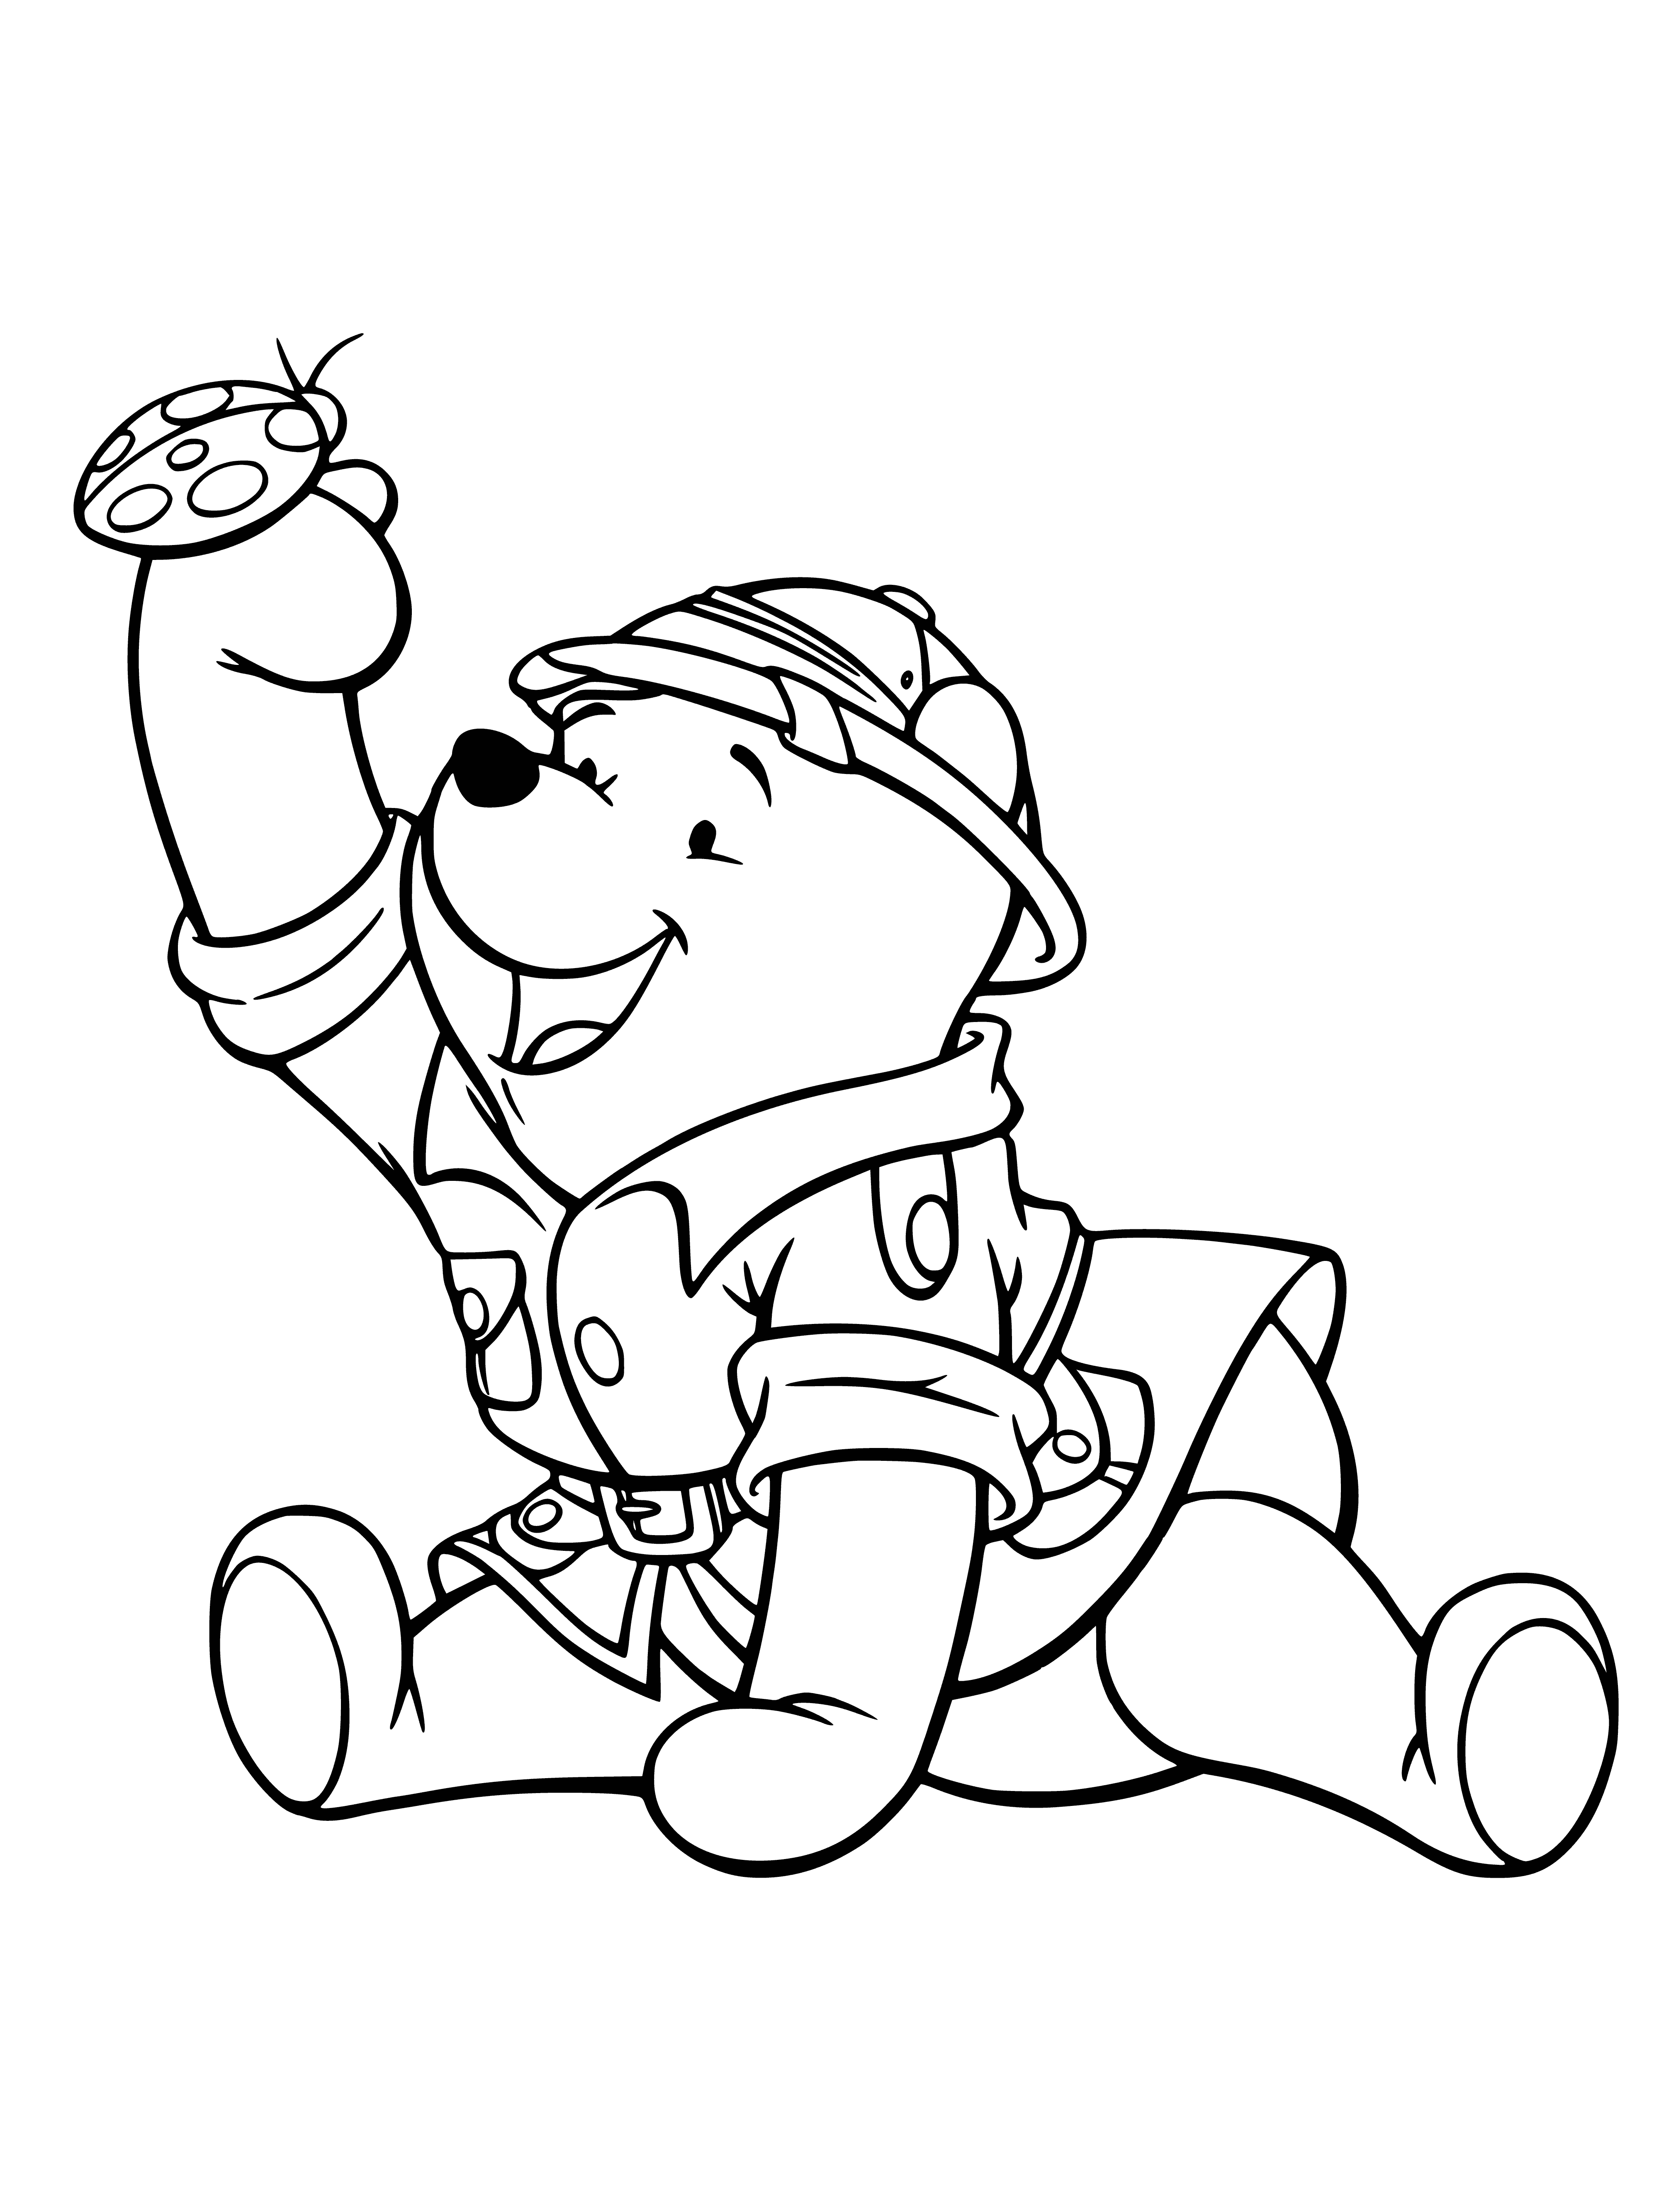 coloring page: Winnie is on an expedition in the woods looking for something, wearing a red shirt & scarf and carrying a large sack & stick.